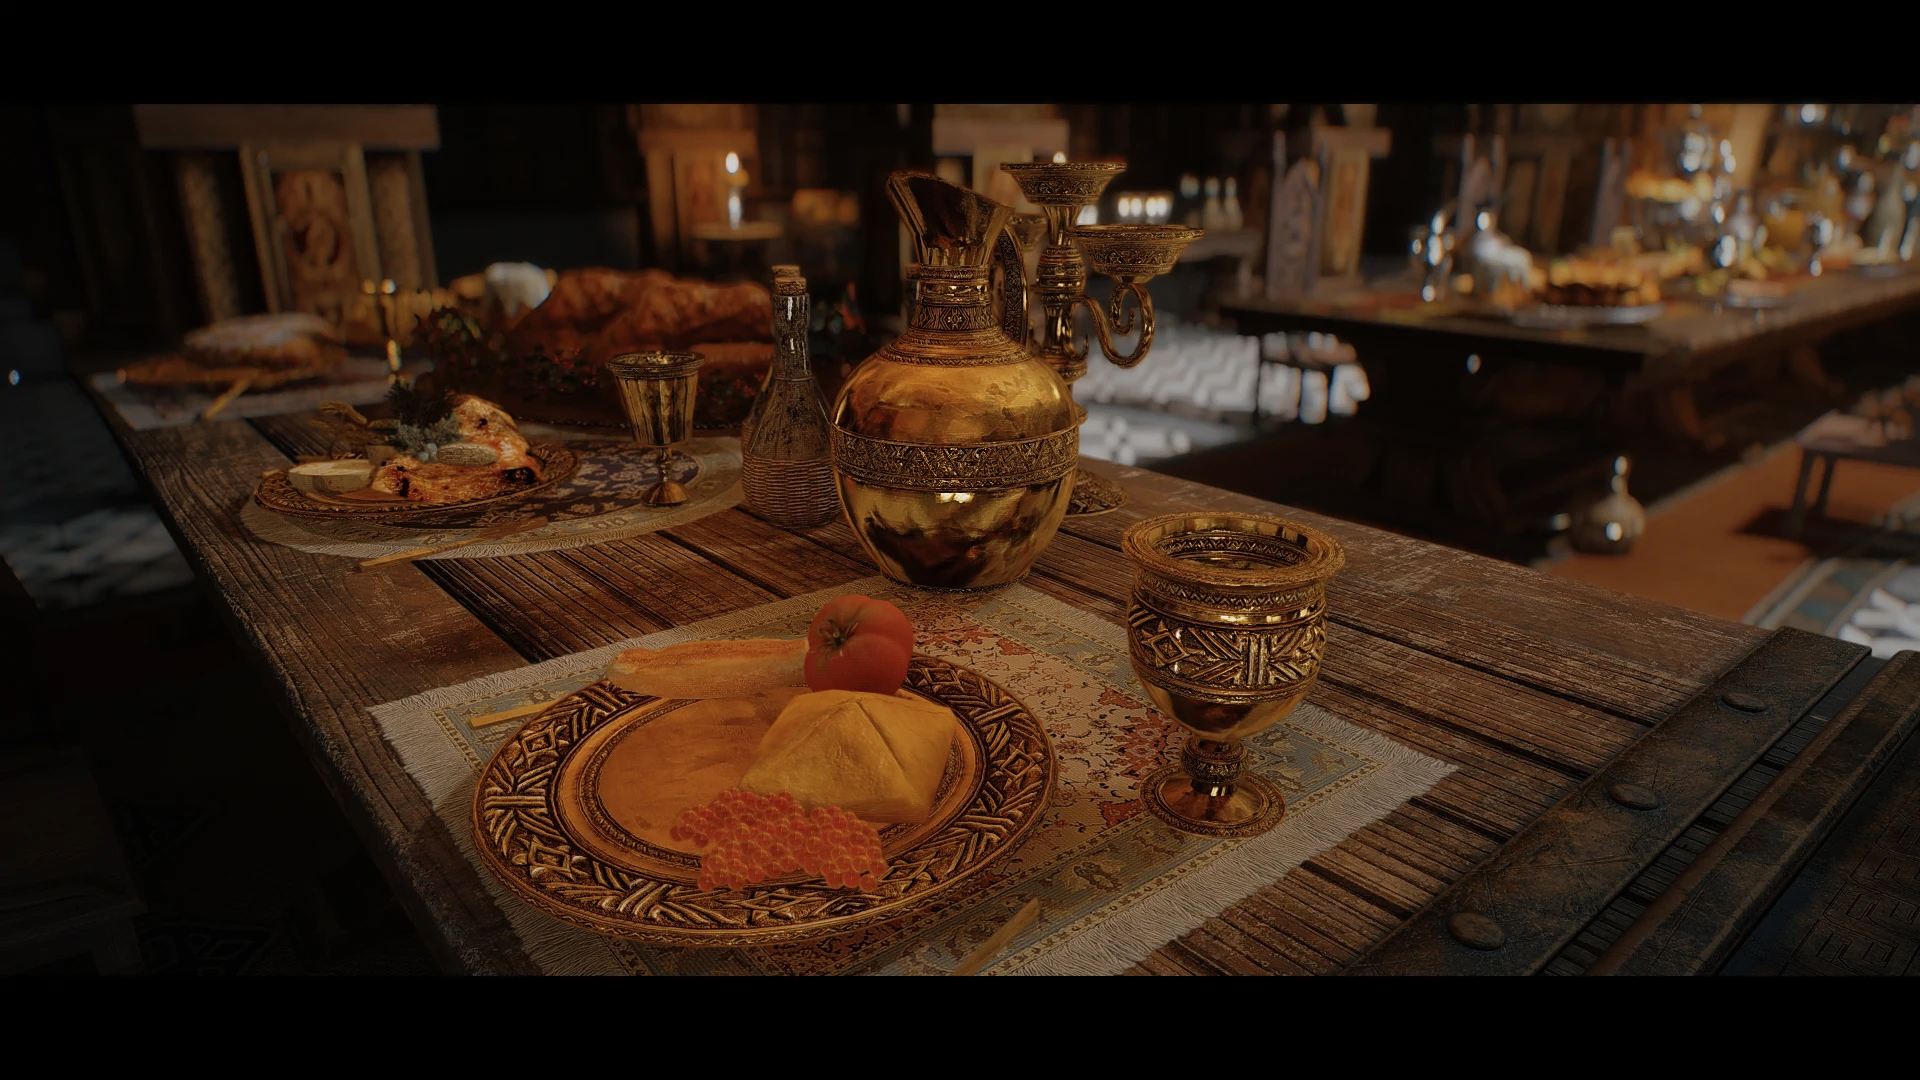 Fancy tableware from medieval fantasy times